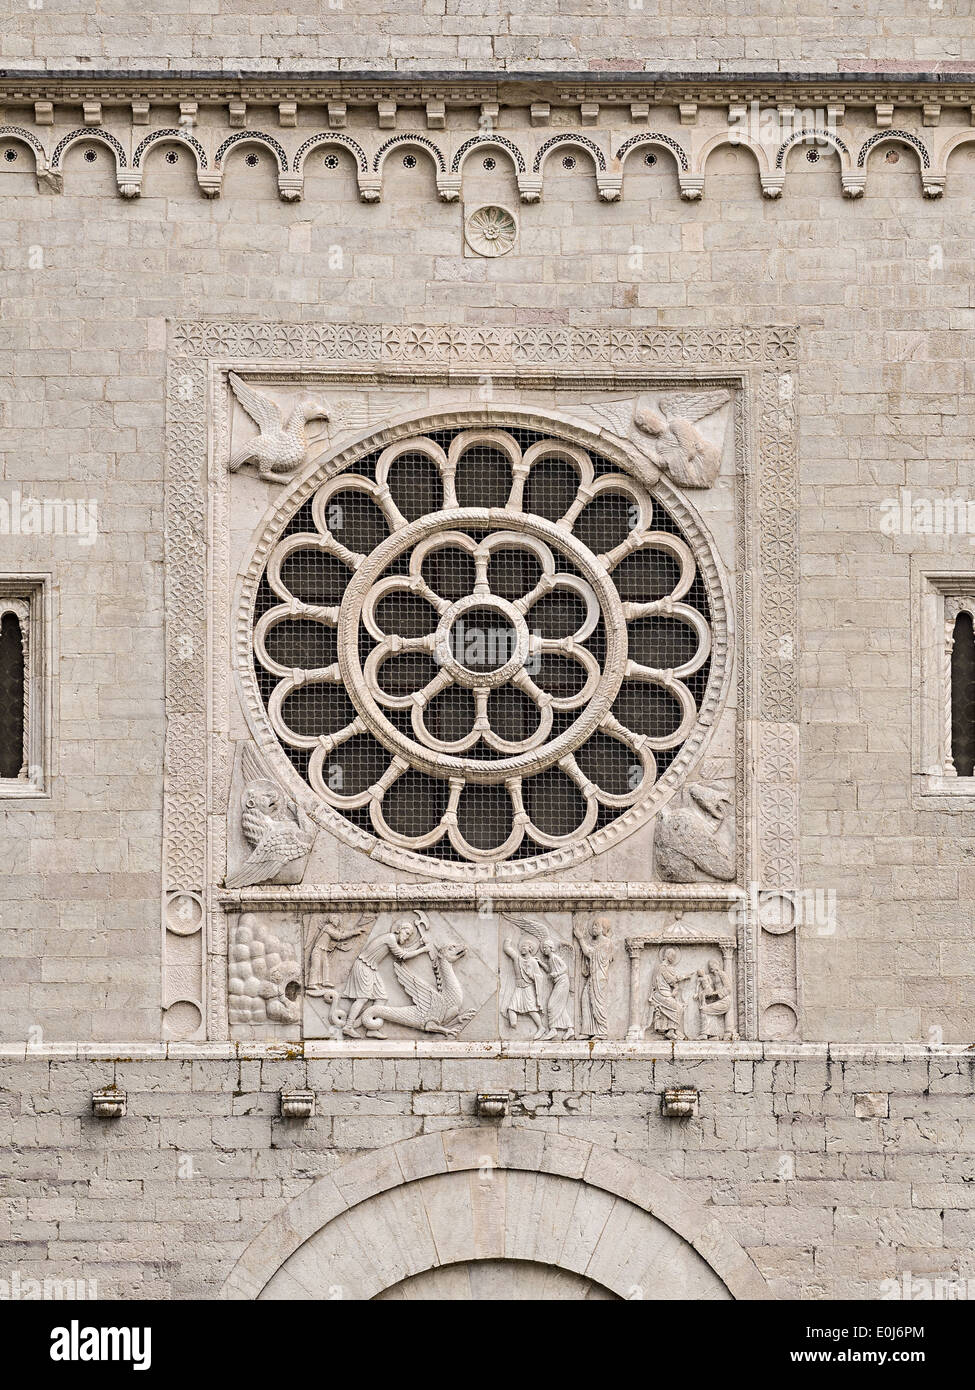 Abbey of Saints Felice and Mauro Val di Narco, Umbria, Italy; detail of the facade Stock Photo